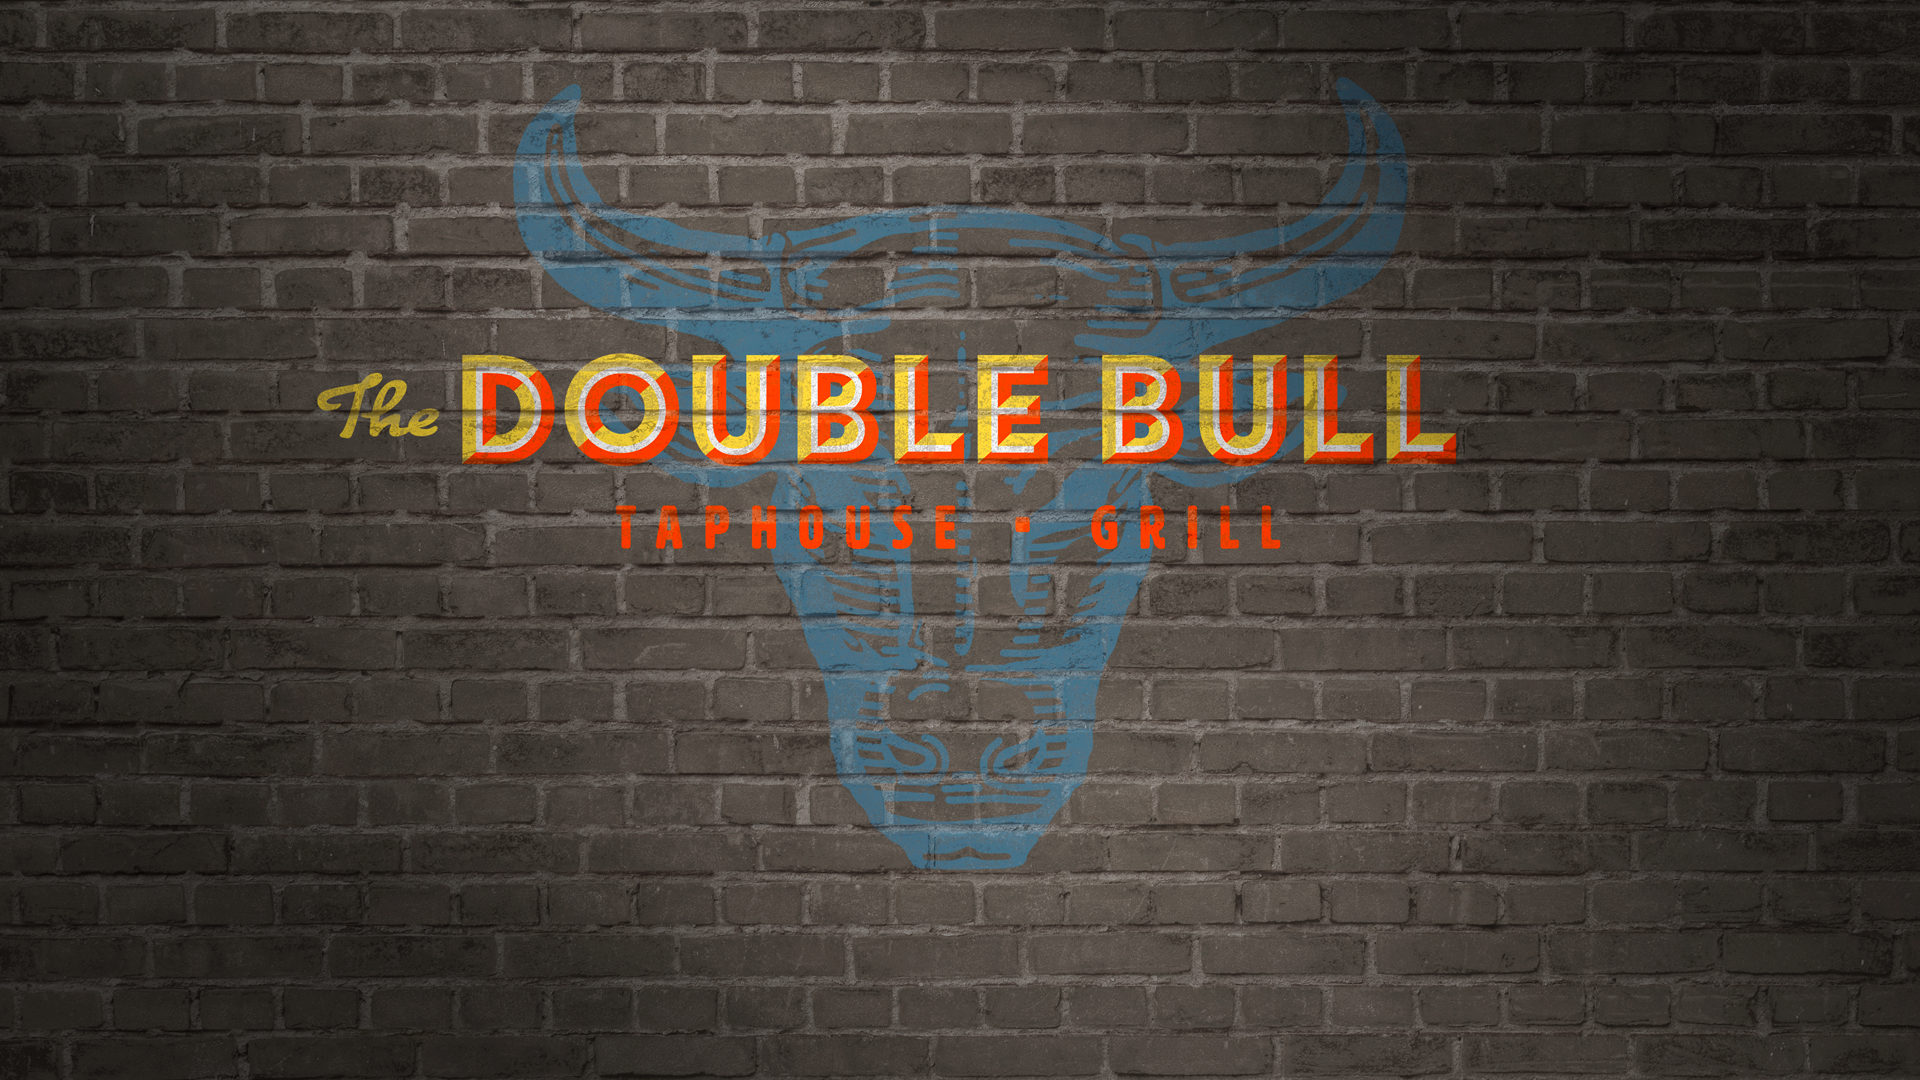 The Double Bull Taphouse & Grill